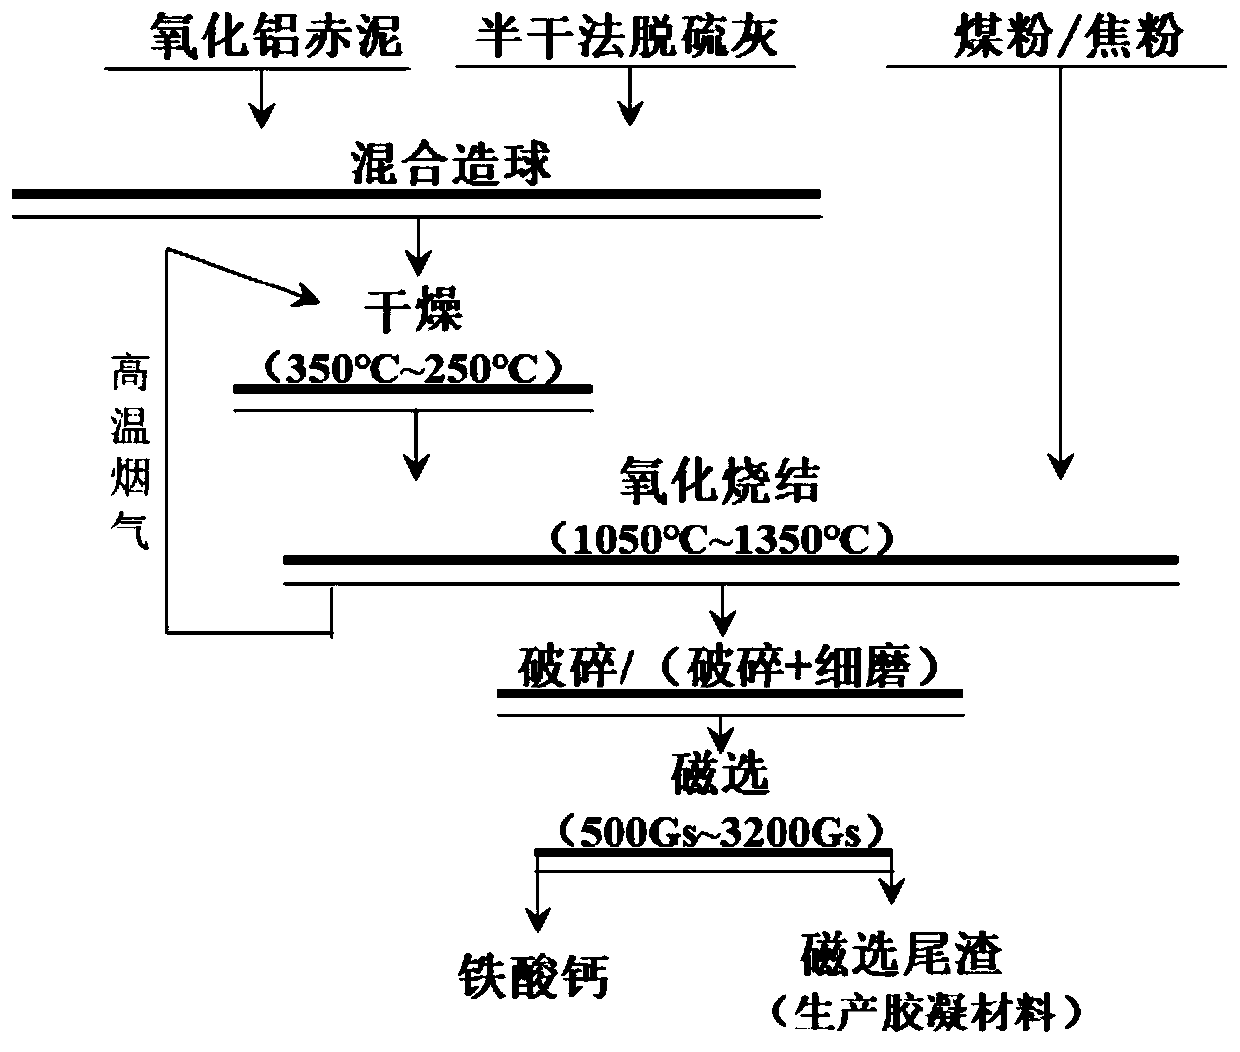 Co-recycling method of aluminum oxide red mud and semi-dry desulfurized fly ash